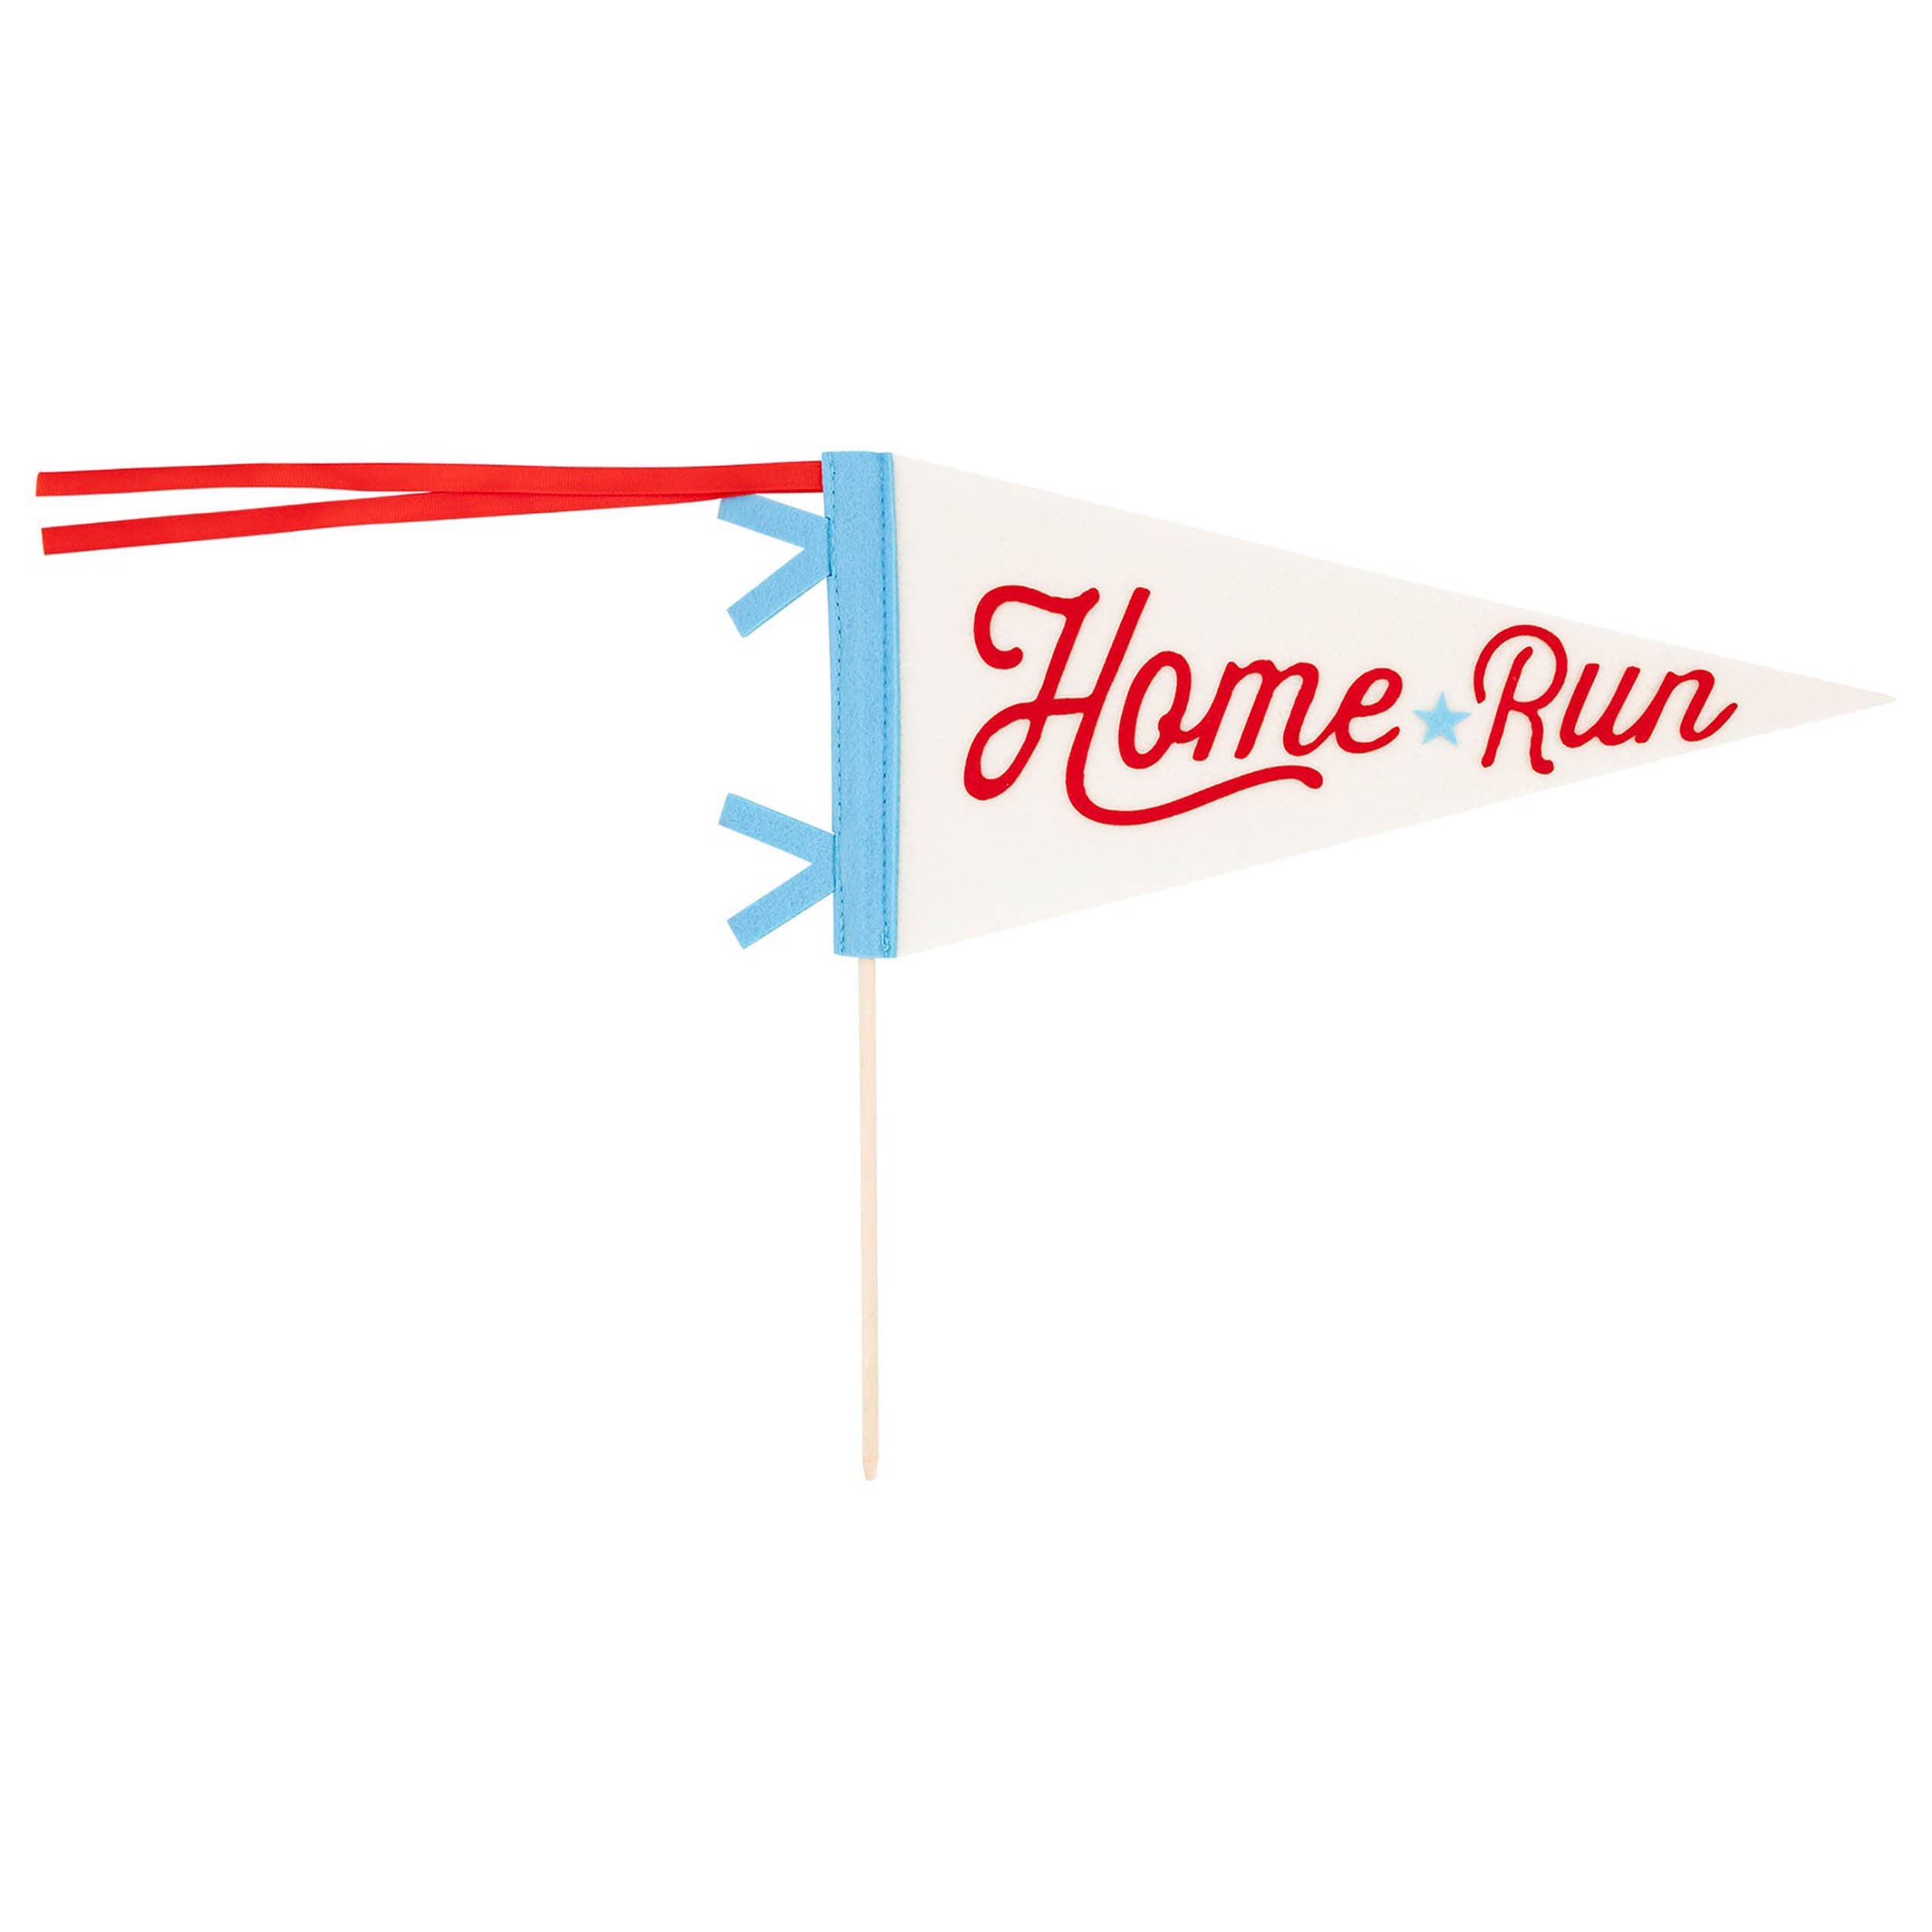 Baseball Pennant Banner - Says Home Run in Red Script with light blue & red ribbons - Made of Felt with Wooden Dowel